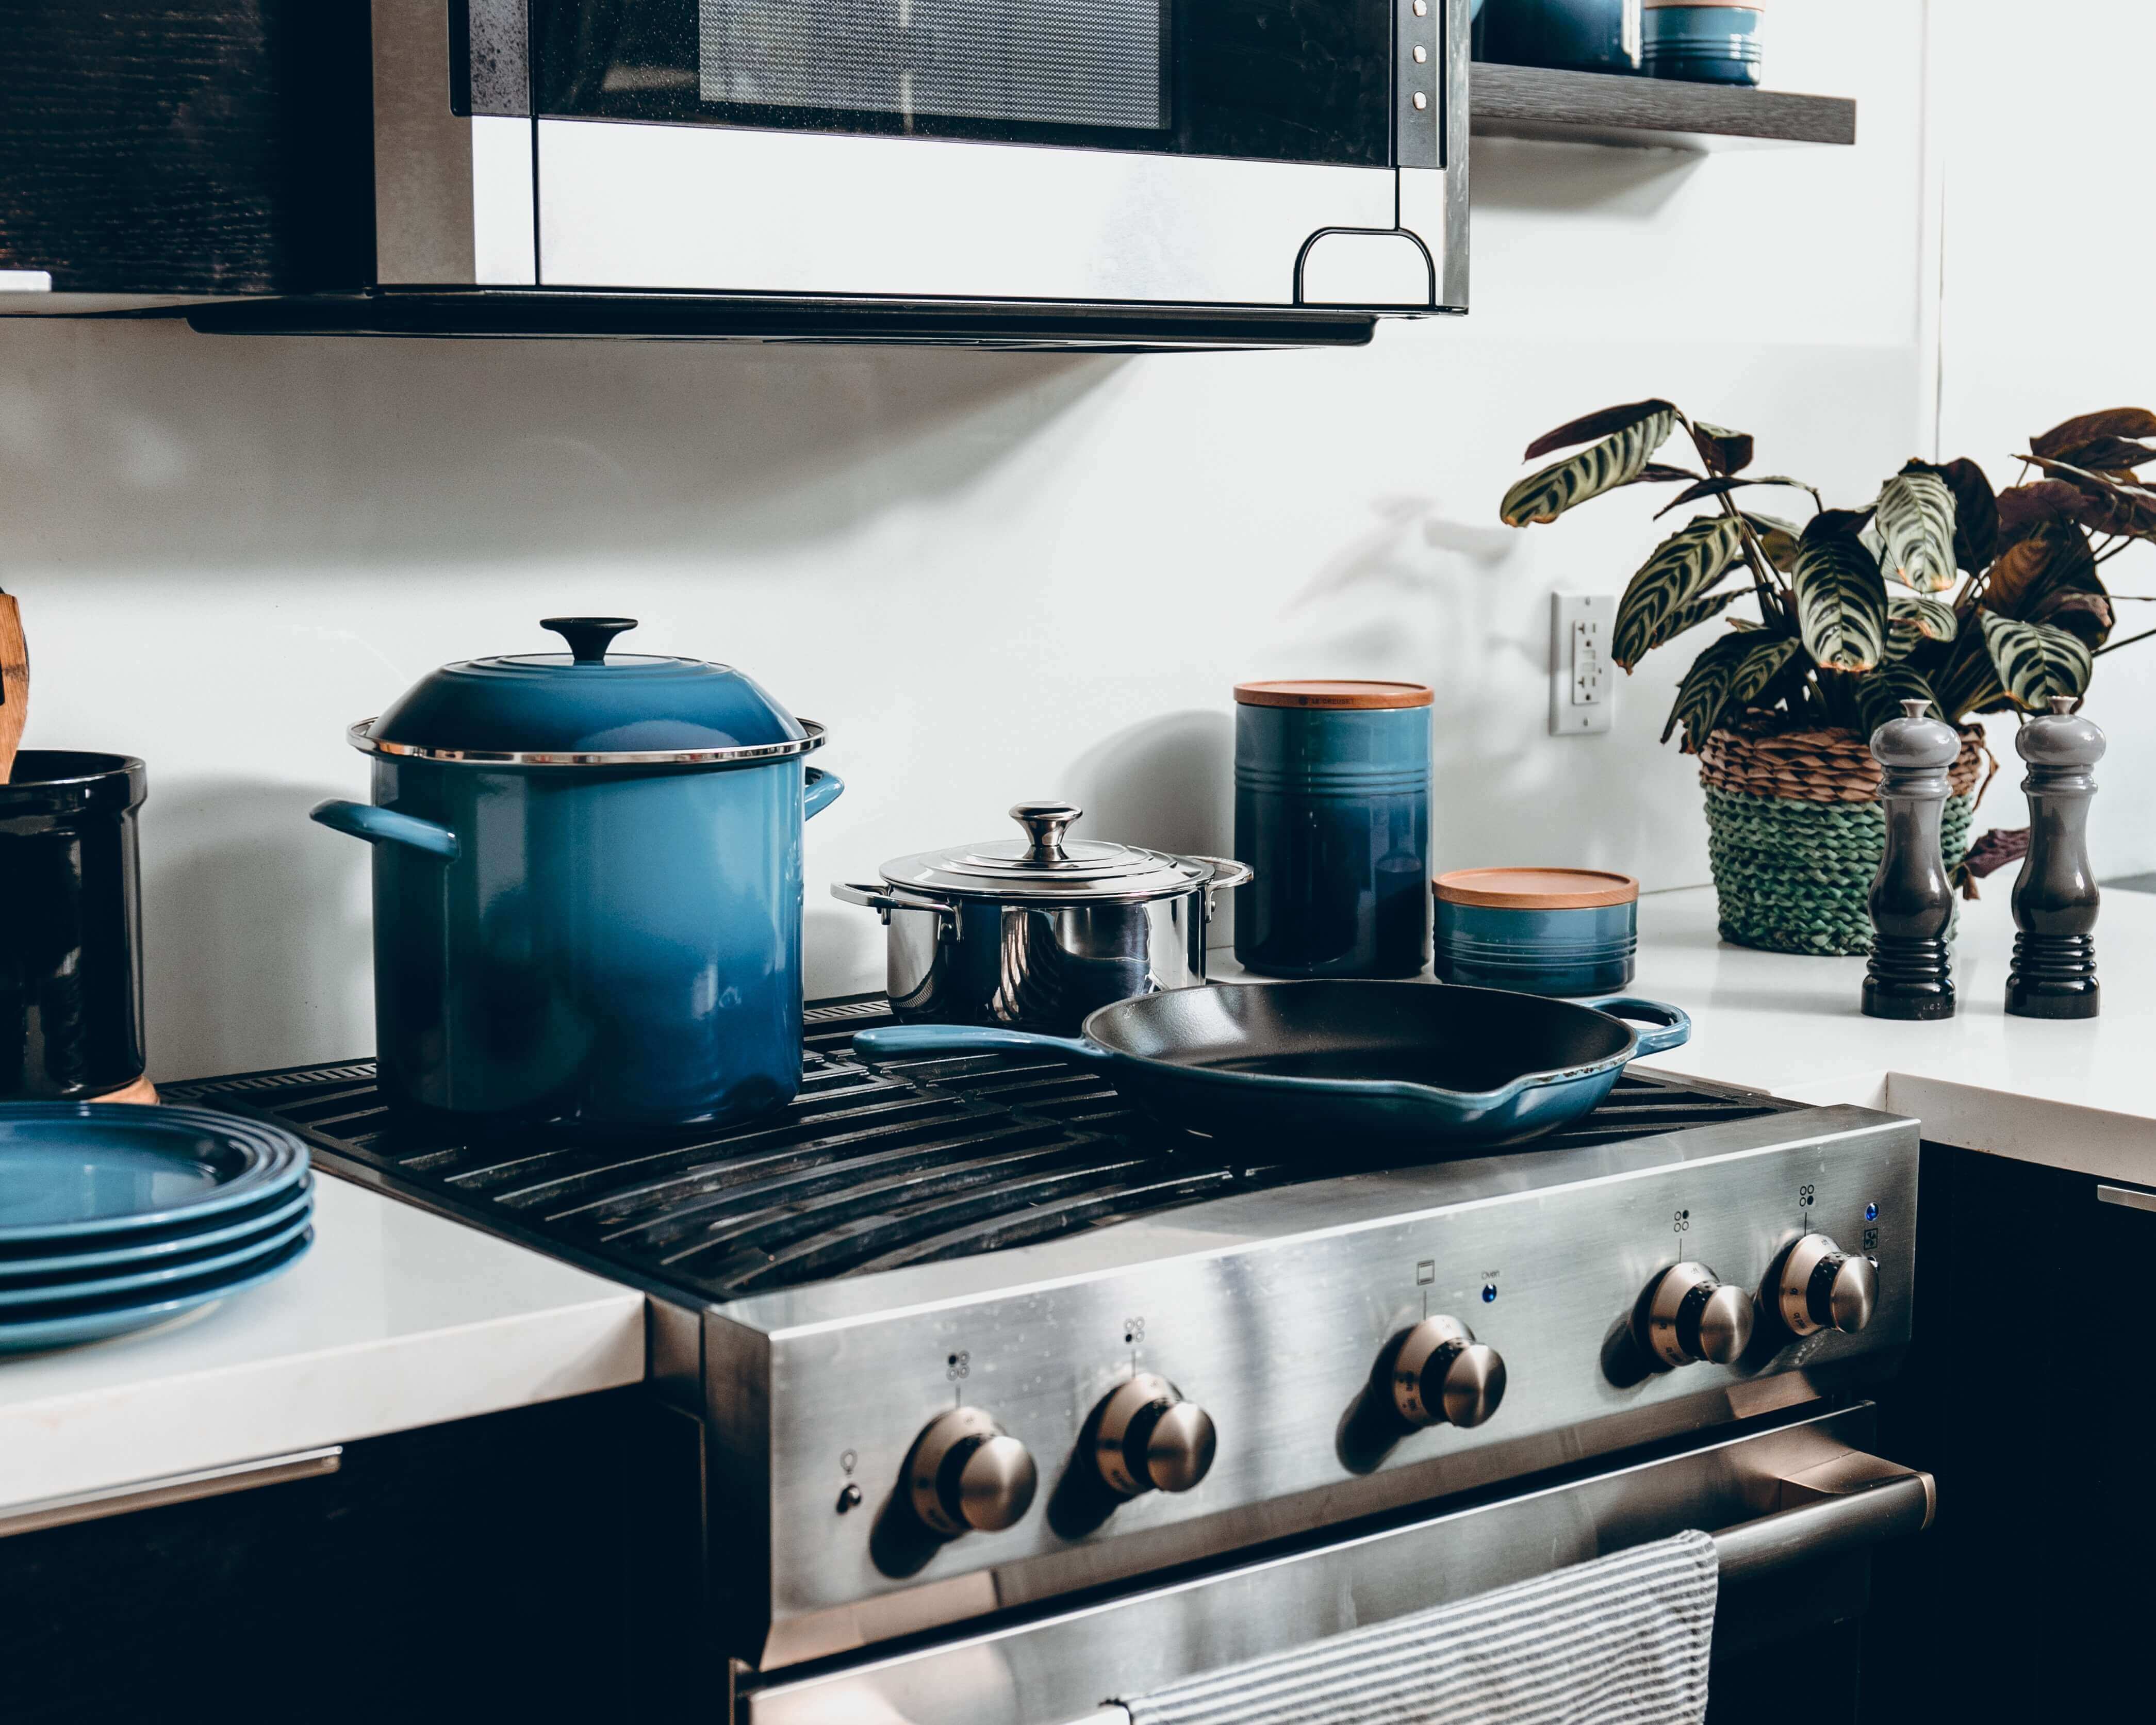 A beautiful kitchen with blue pots and pans.